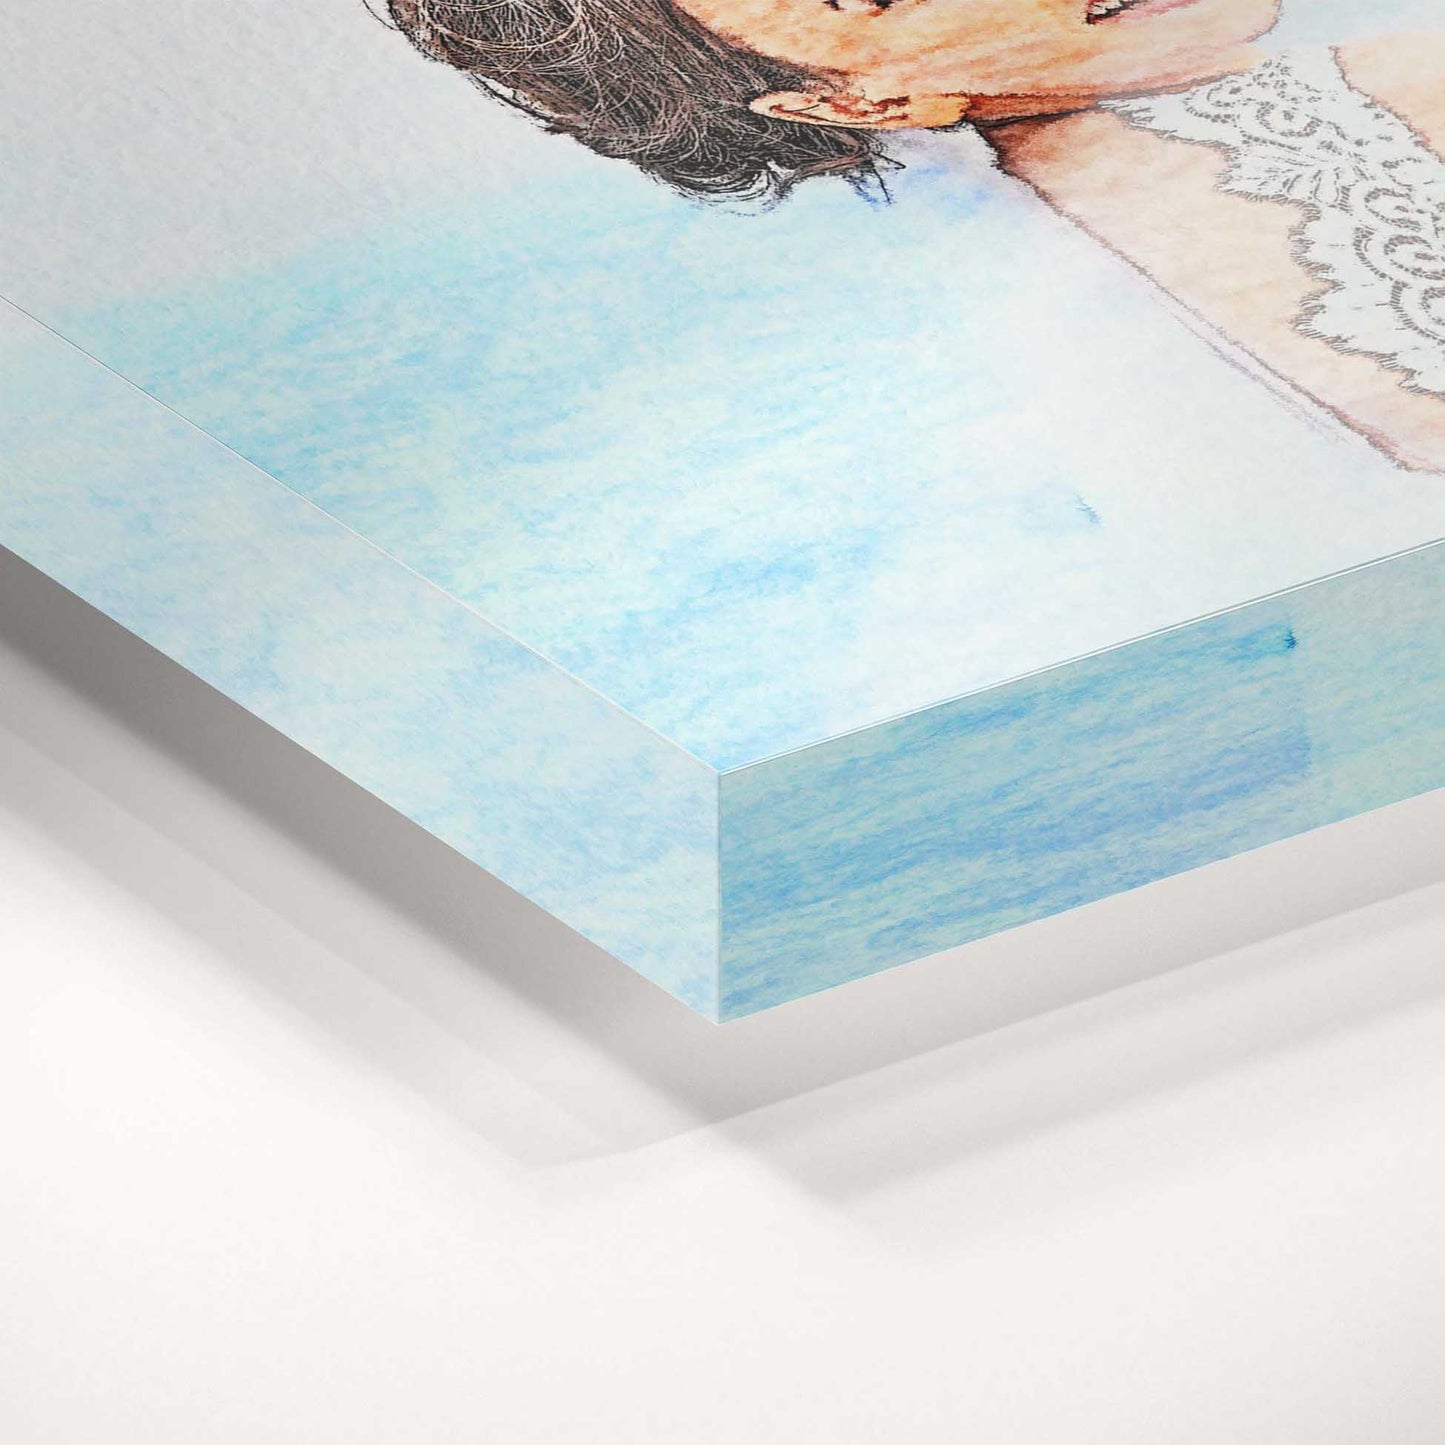 Add a touch of artistic charm to your surroundings with our acrylic block featuring personalised watercolor paintings, creating a visually appealing focal point for your home or office decor